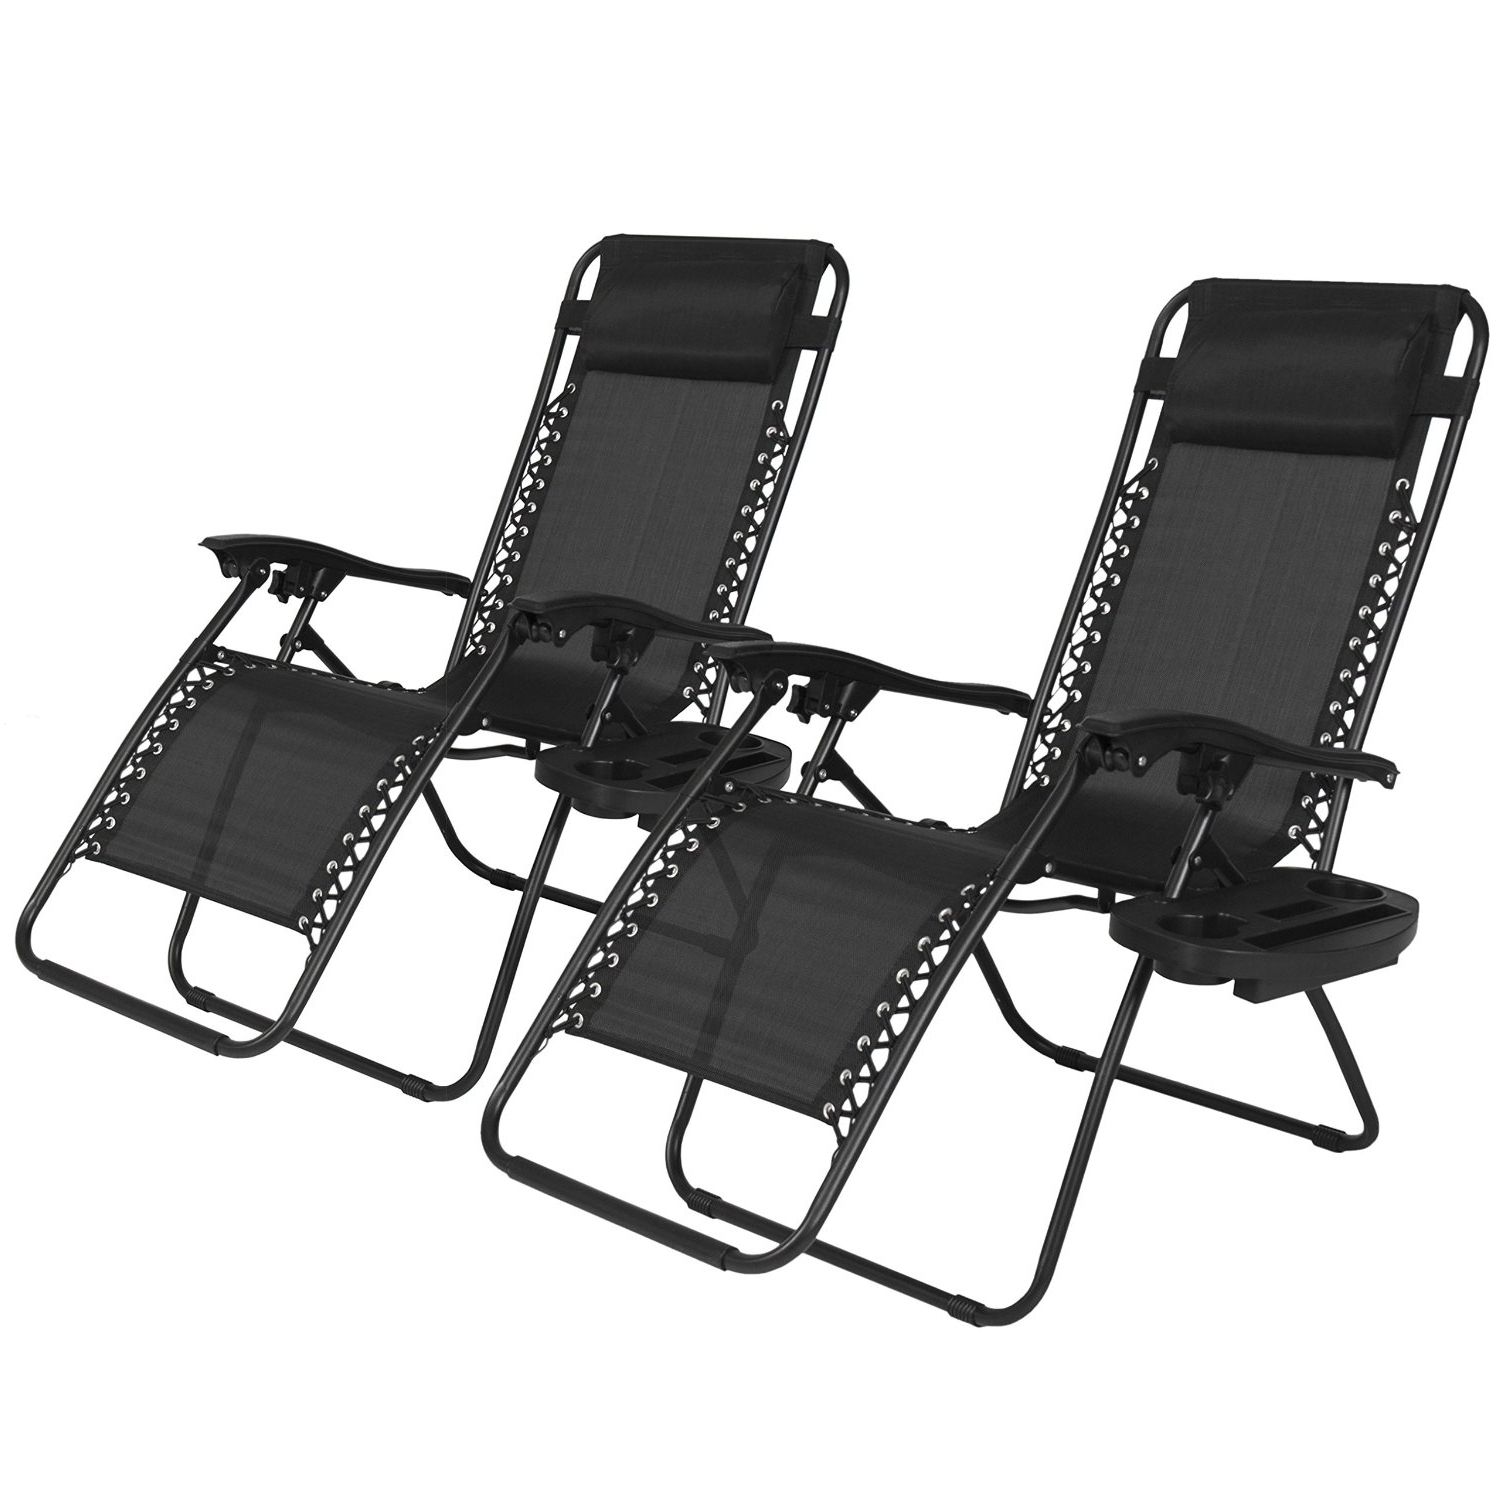 [%top 10 Best Zero Gravity Chair Reviews – Find Yours [2018] With Well Known Zero Gravity Chaise Lounge Chairs|zero Gravity Chaise Lounge Chairs Intended For Newest Top 10 Best Zero Gravity Chair Reviews – Find Yours [2018]|famous Zero Gravity Chaise Lounge Chairs Within Top 10 Best Zero Gravity Chair Reviews – Find Yours [2018]|favorite Top 10 Best Zero Gravity Chair Reviews – Find Yours [2018] With Regard To Zero Gravity Chaise Lounge Chairs%] (View 12 of 15)